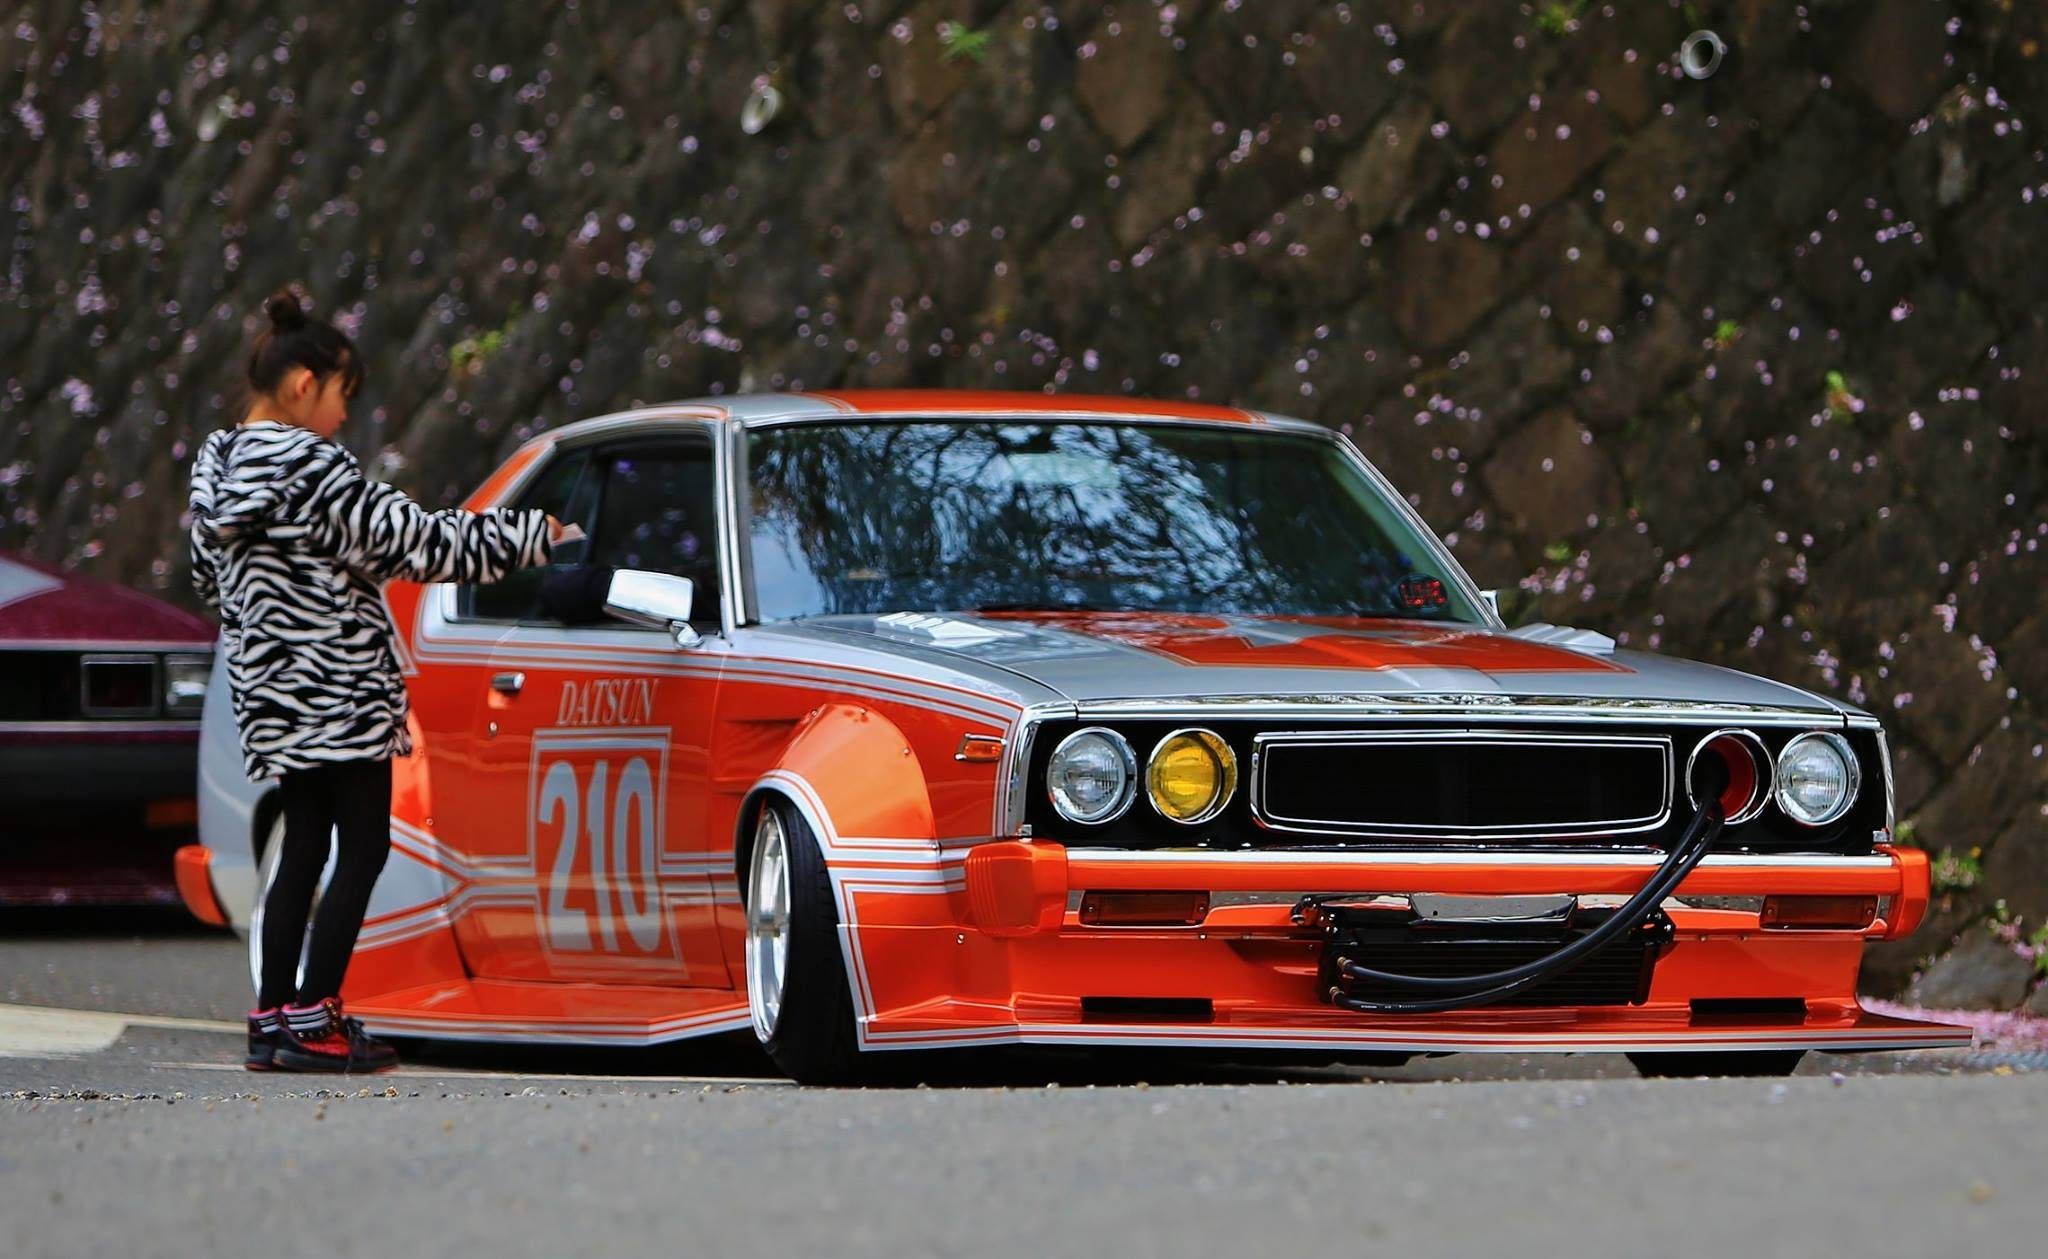 5 Awesome Japanese Car Modifying Trends 5 That Are Beyond Weird